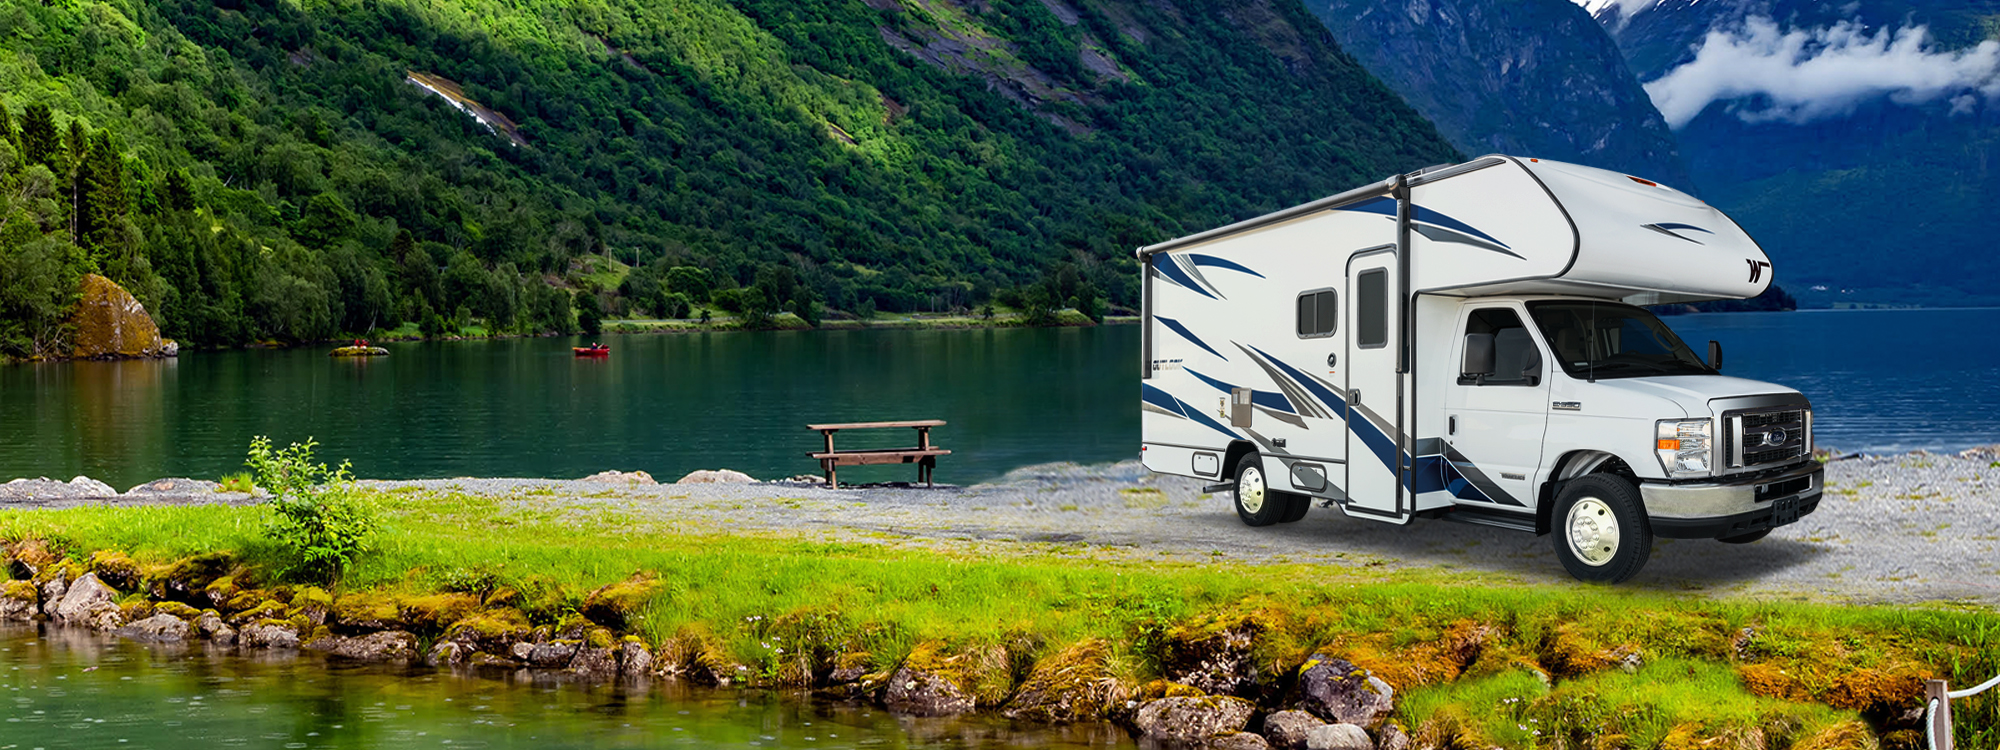 RV parked in a scenic spot